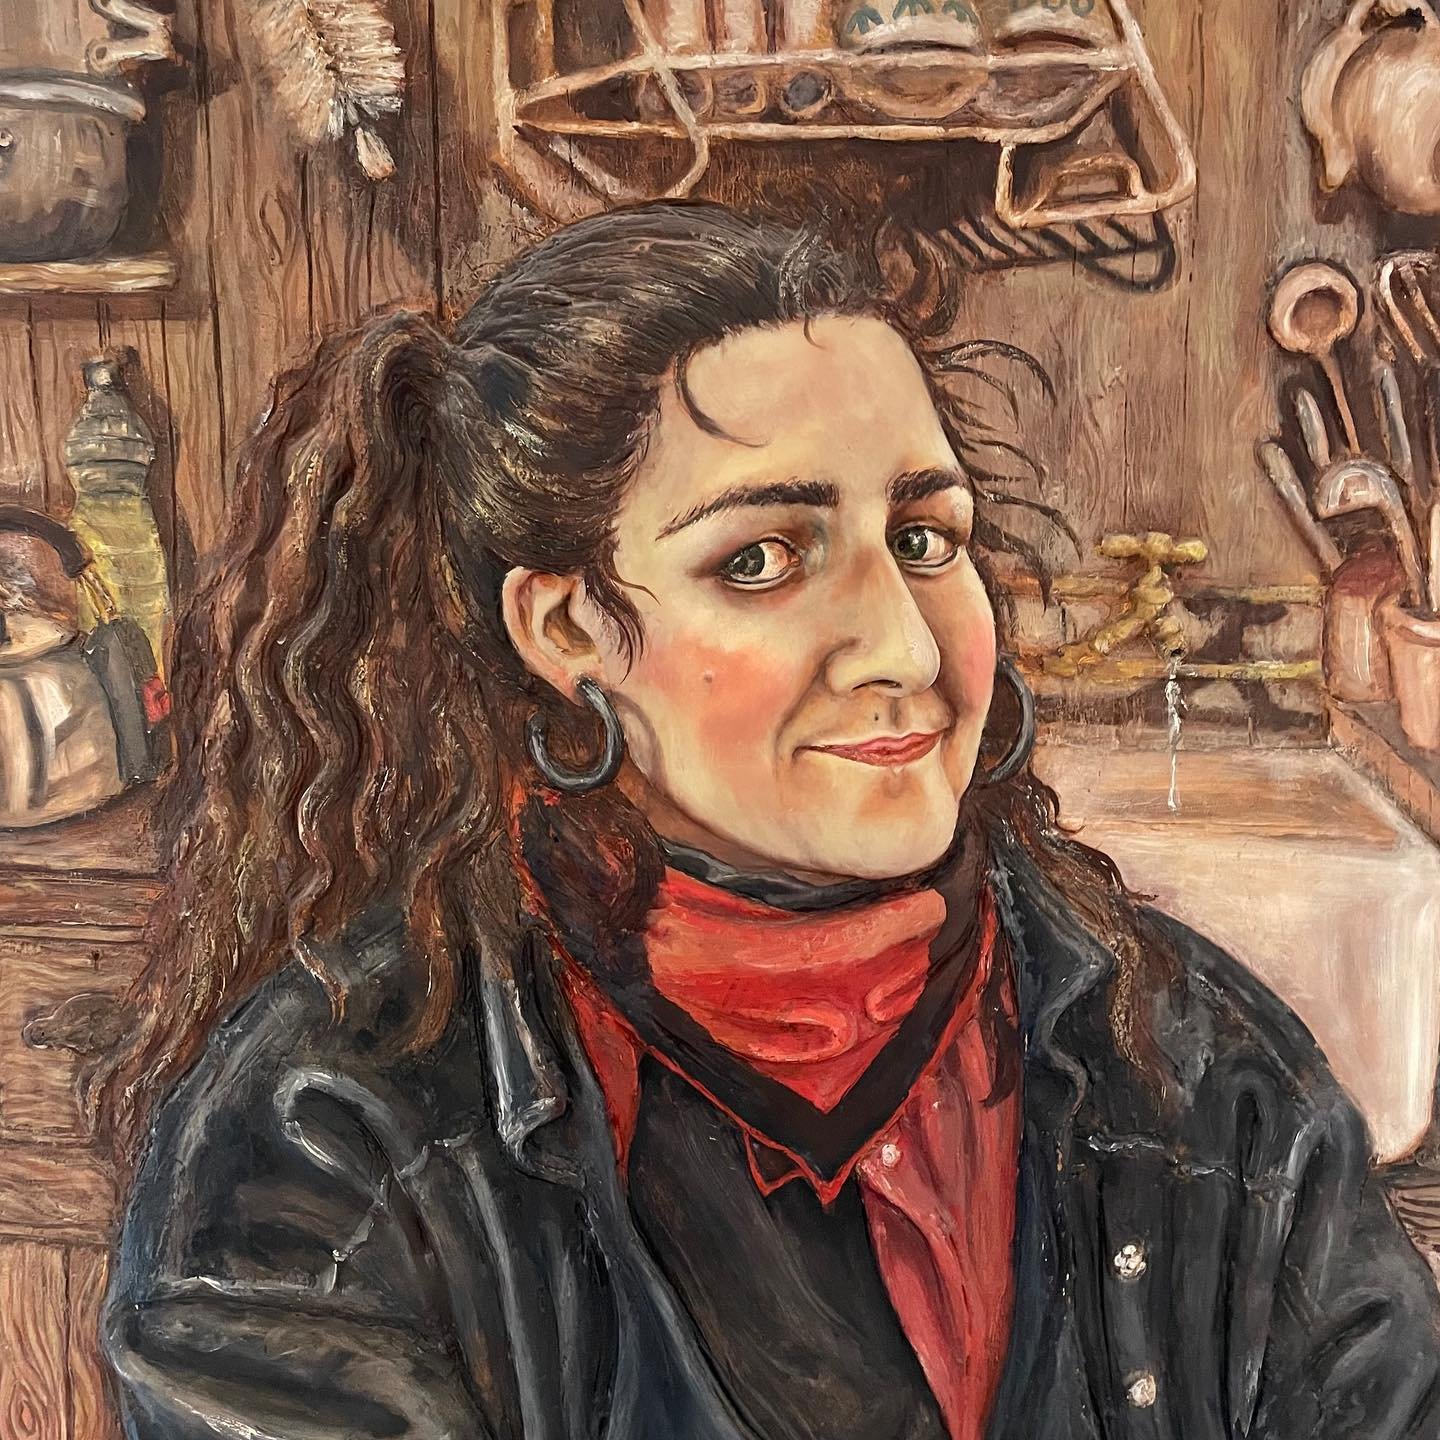 Re-living my youth.. flashback &ldquo;Self Portrait with salmon &amp; cream cheese bagel with coffee&rdquo; updated profile ig pic (today).. this relief was exhibited in the National Portrait gallery BP awards, 1991. Wearing a leather jacket &amp; la